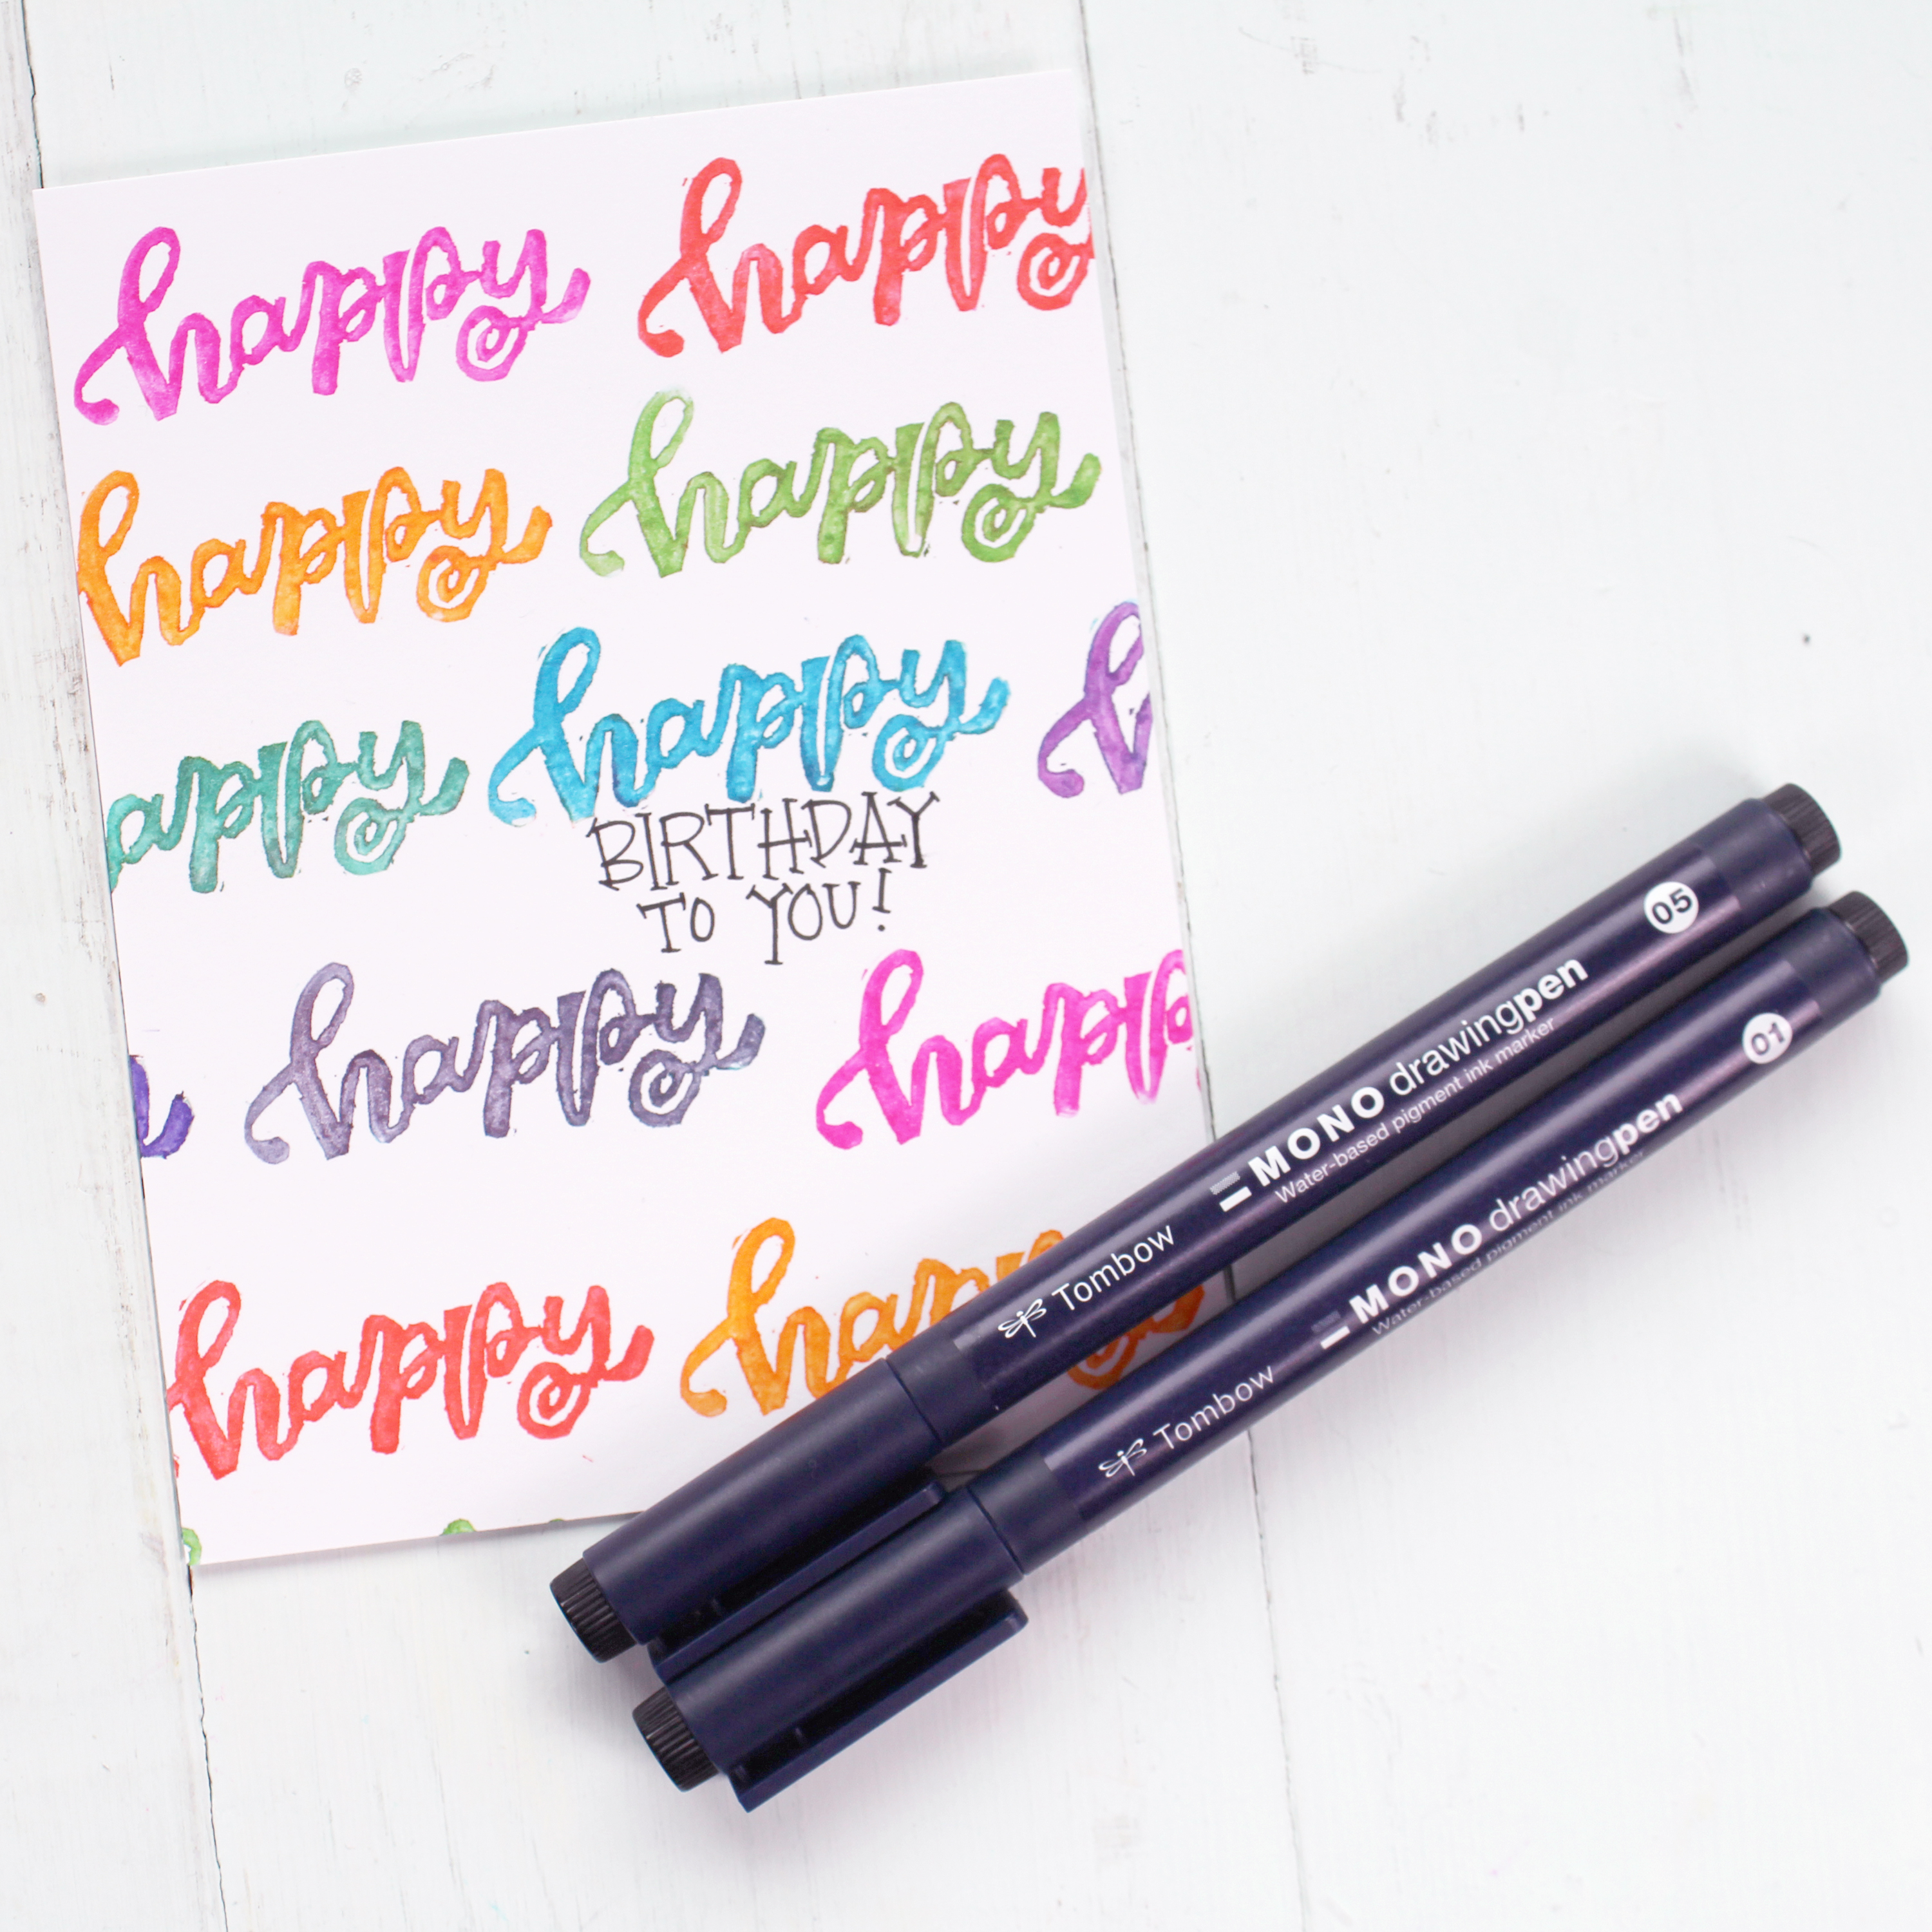 Add a sentiment with MONO Drawing Pens to a Happy Birthday card with a carved stamp made from a Tombow MONO Eraser.